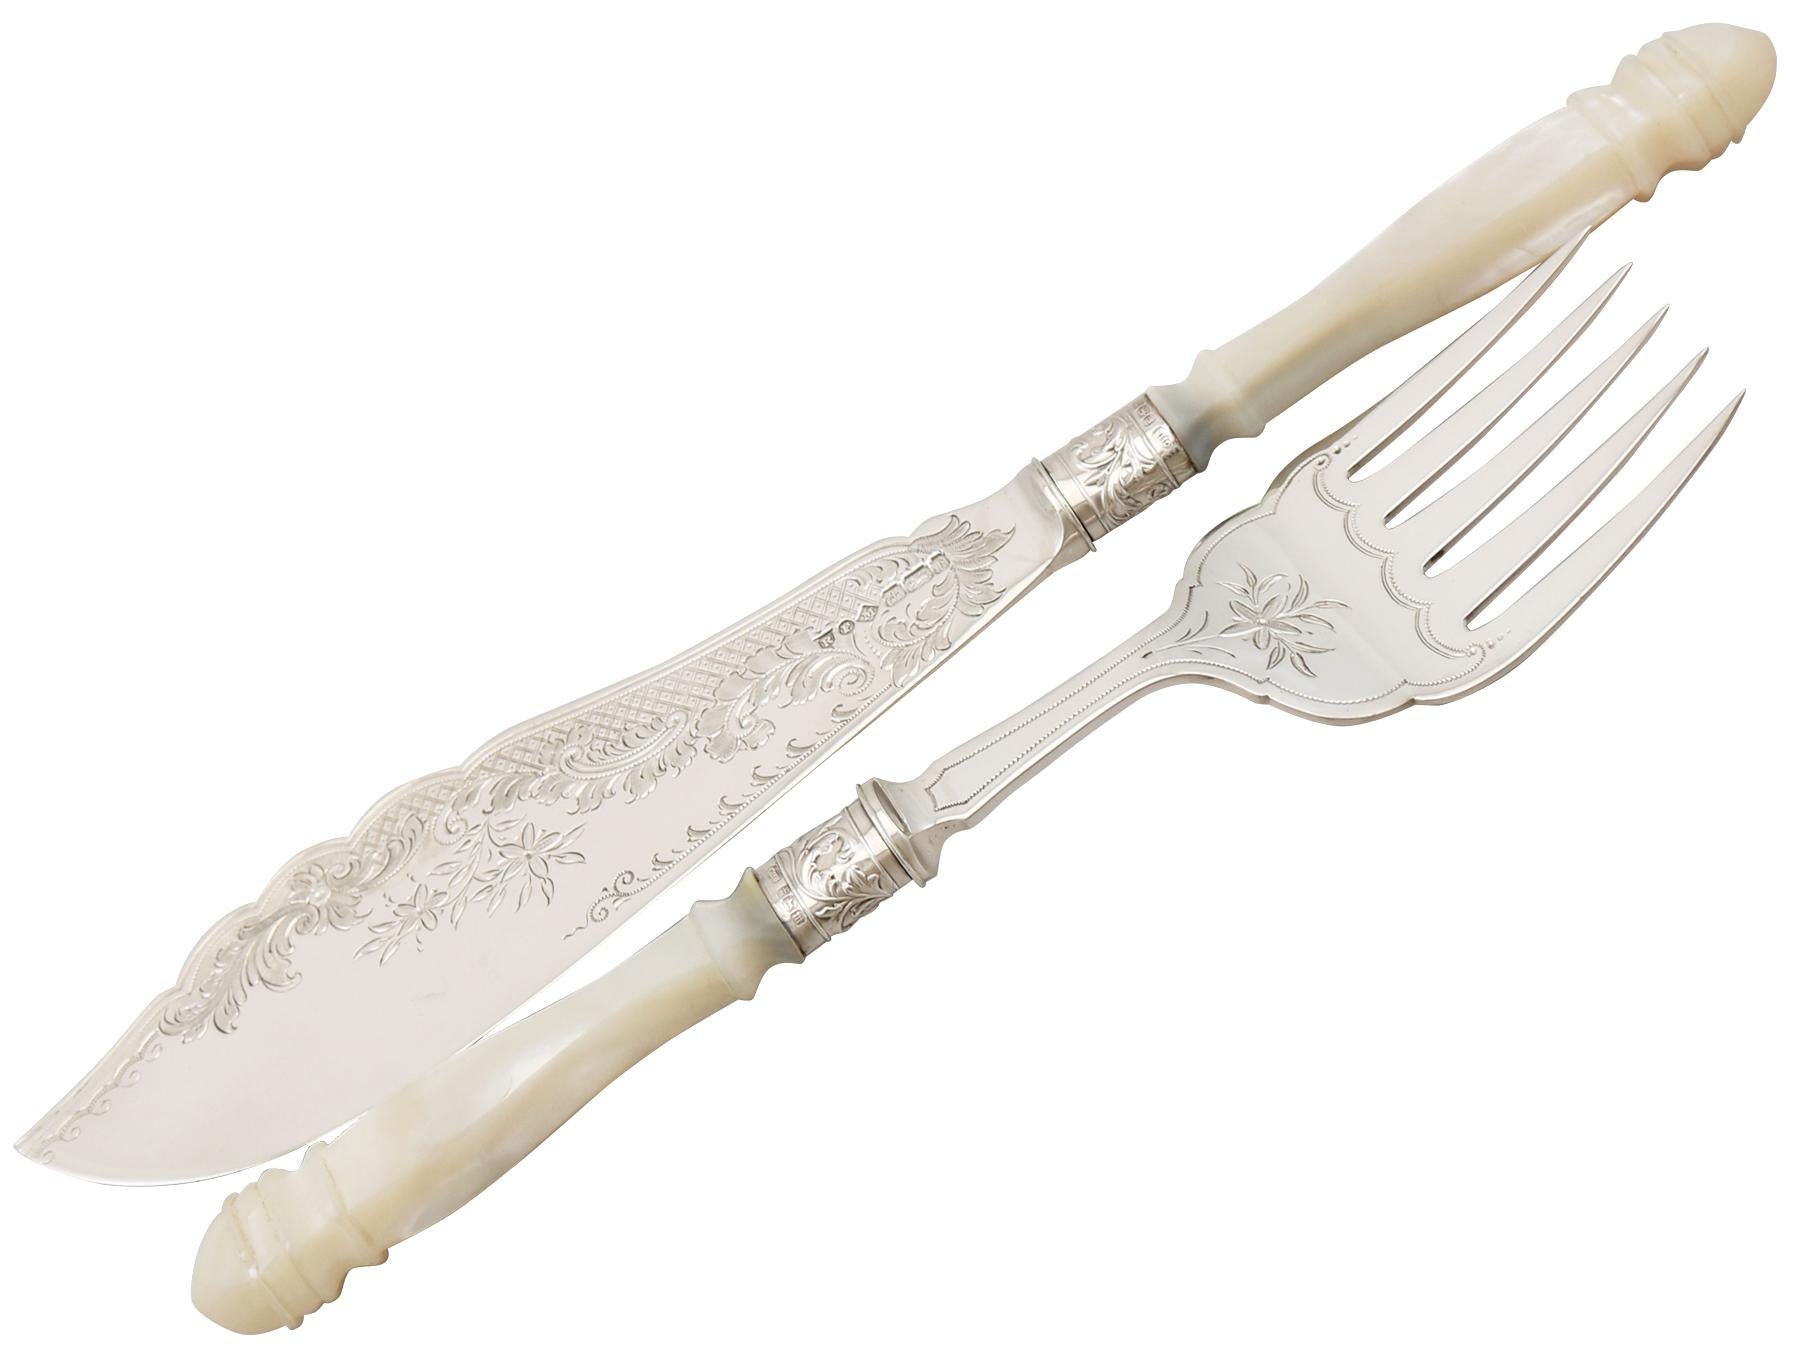 A fine and impressive pair of antique Edwardian English sterling silver and carved mother of pearl handled fish servers - boxed; an addition to our silver flatware collection

This fine and impressive pair of antique Edwardian sterling silver and